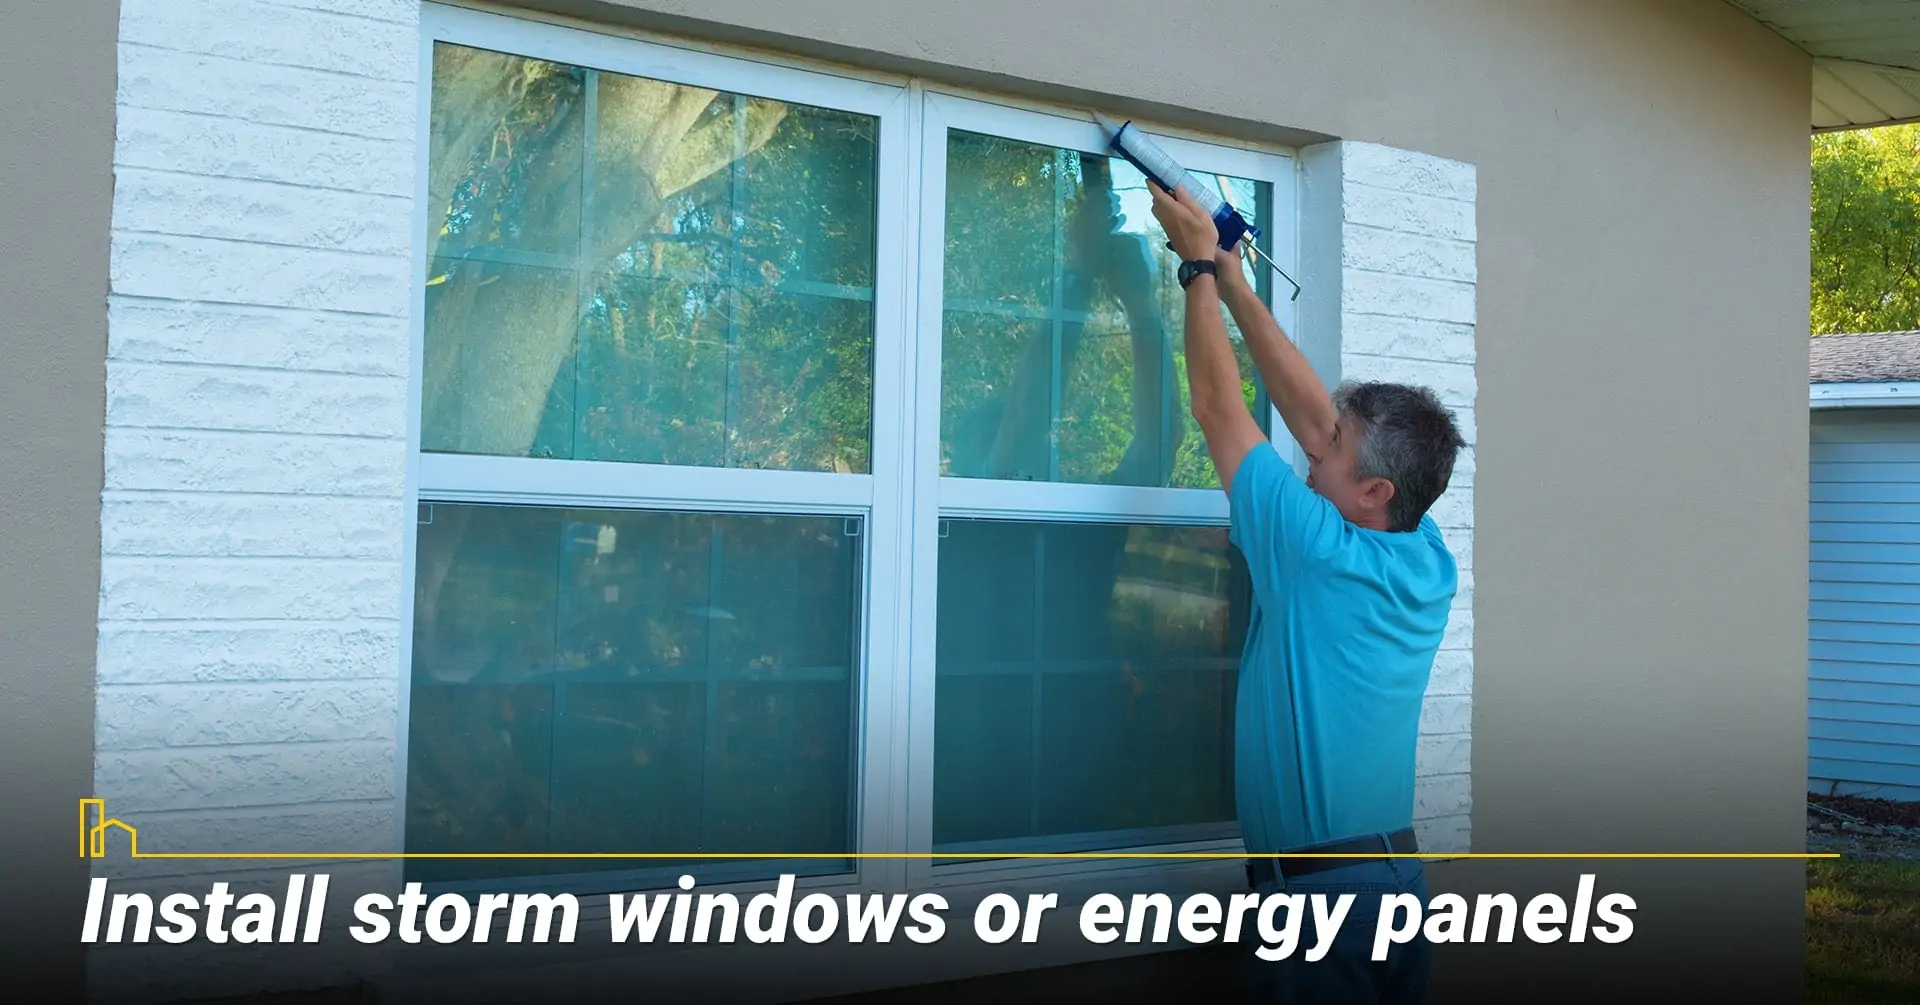 Install storm windows or energy panels, use an extra layer